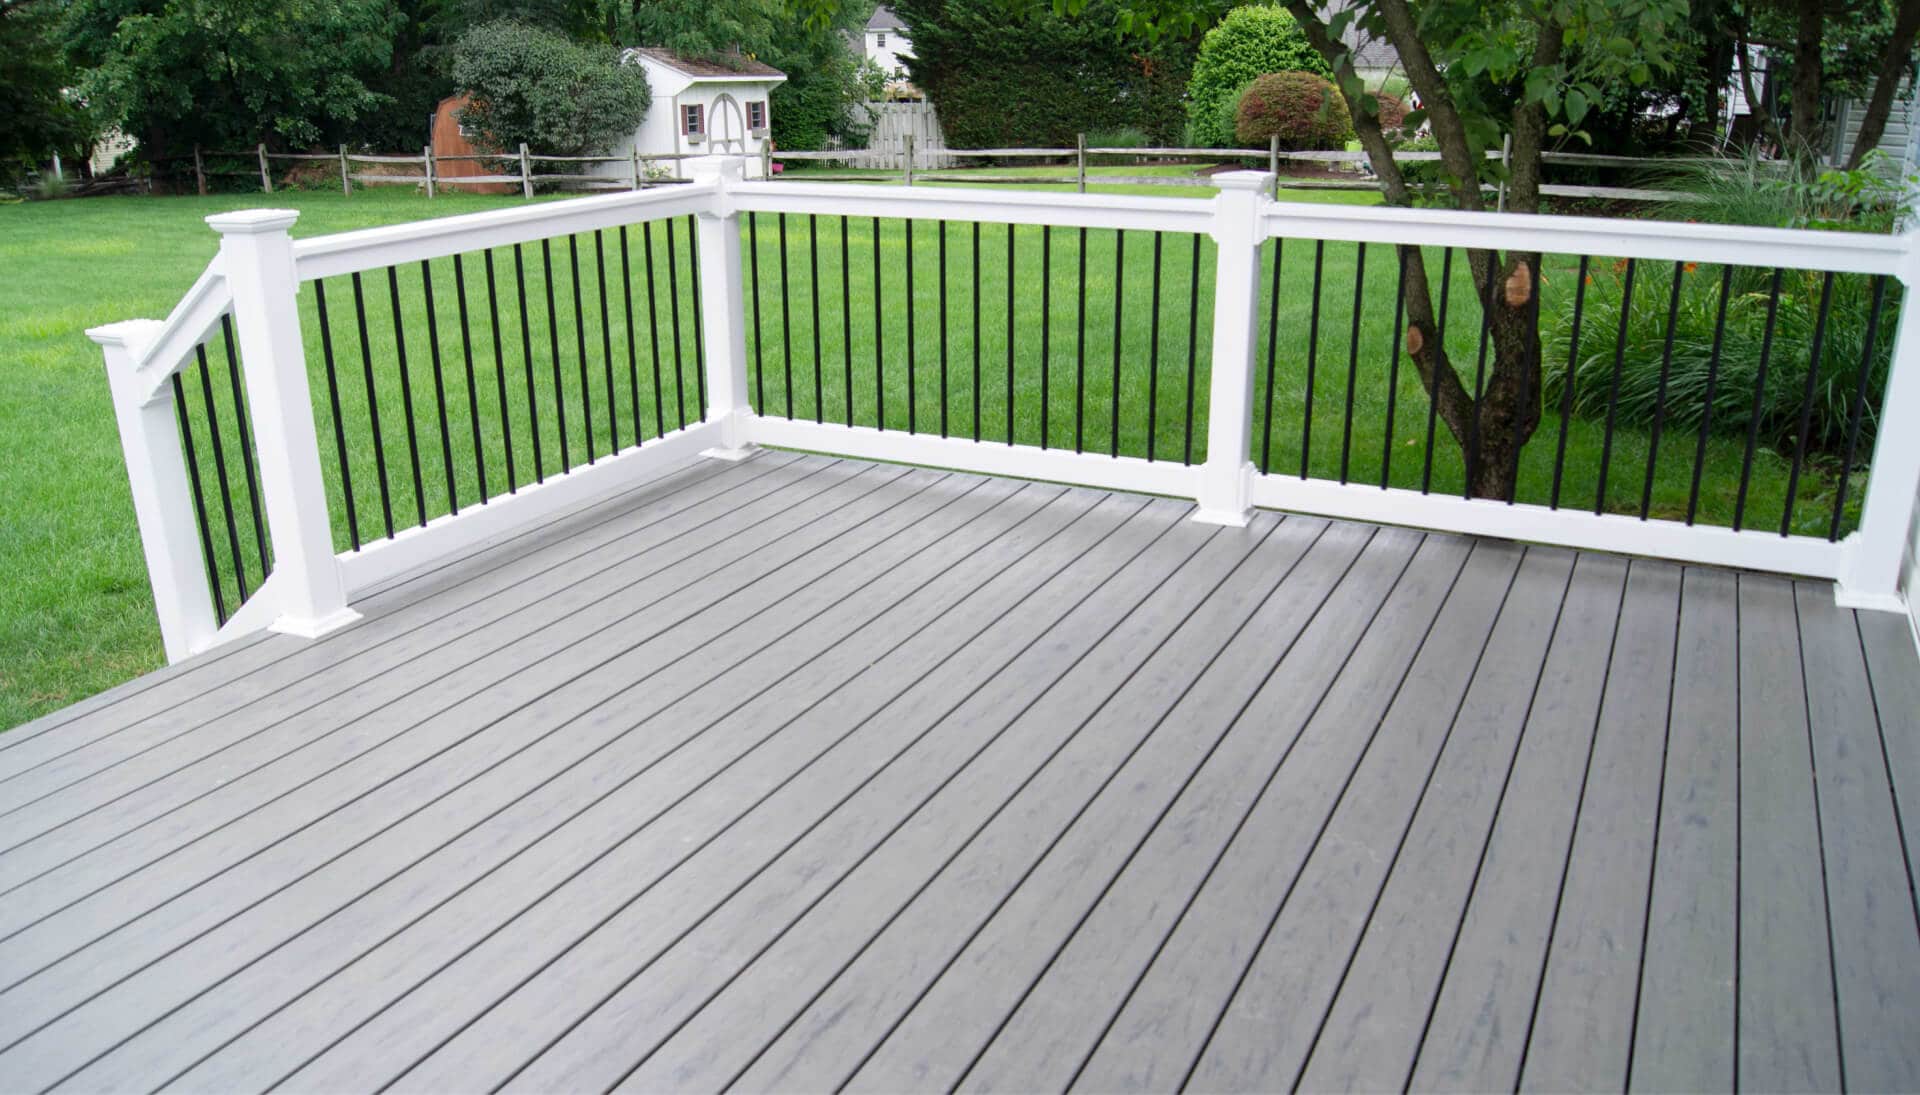 Specialists in deck railing and covers Davenport, Iowa